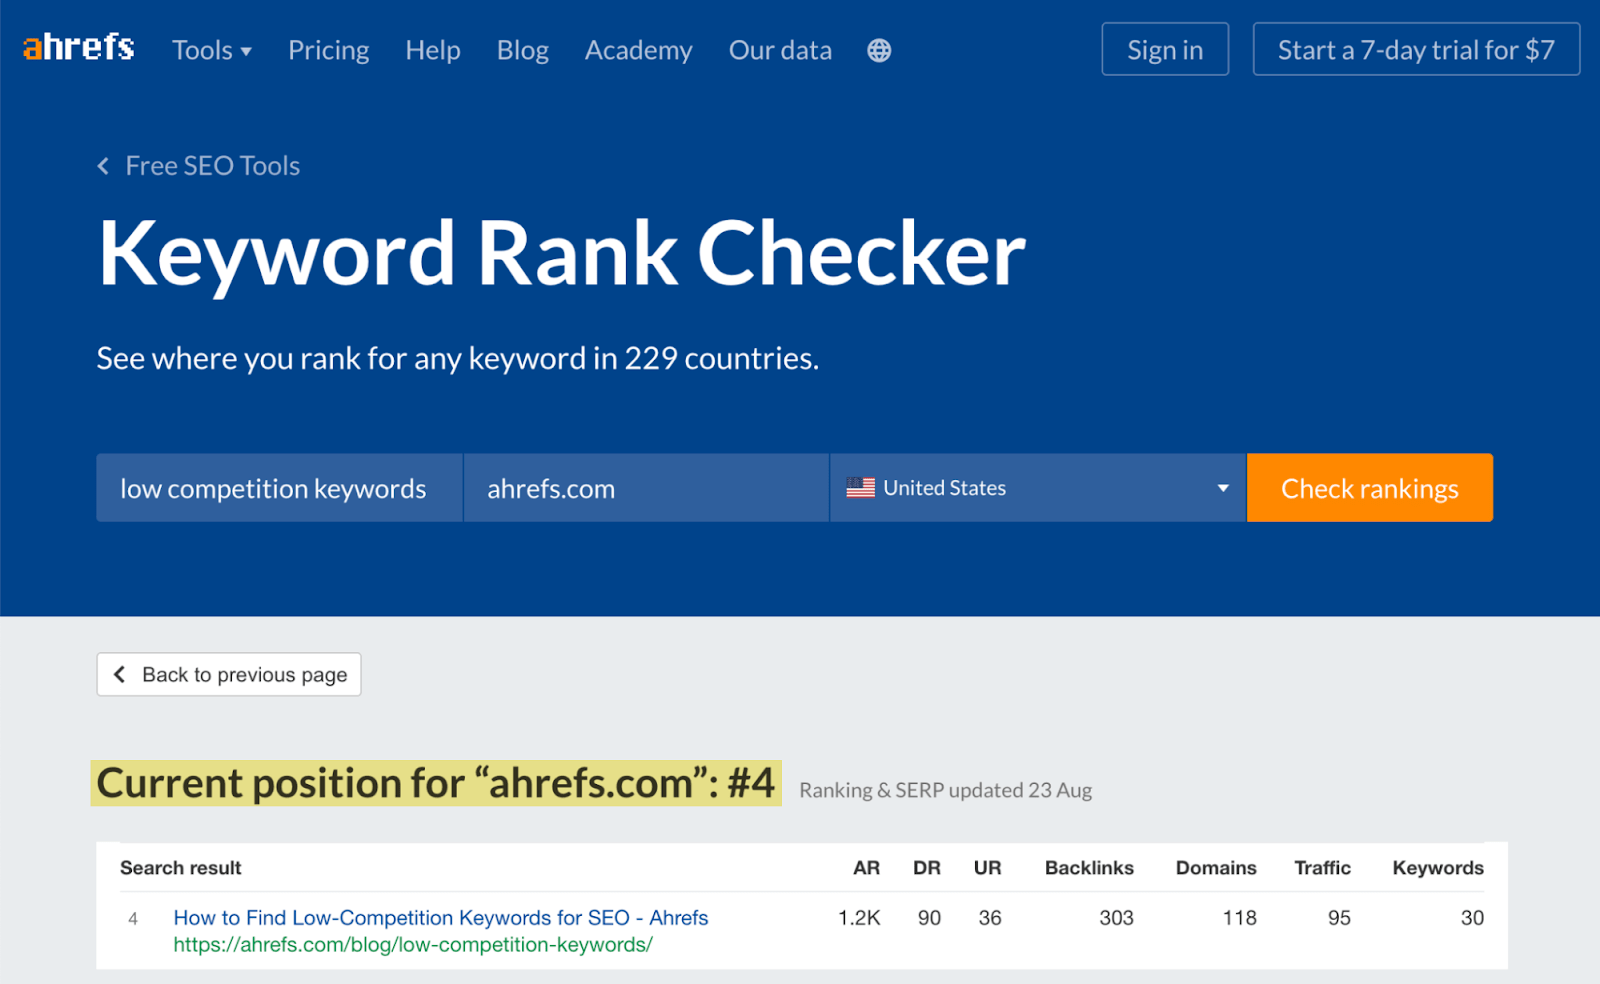 Current ranking position for ahrefs.com for "low competition keywords"